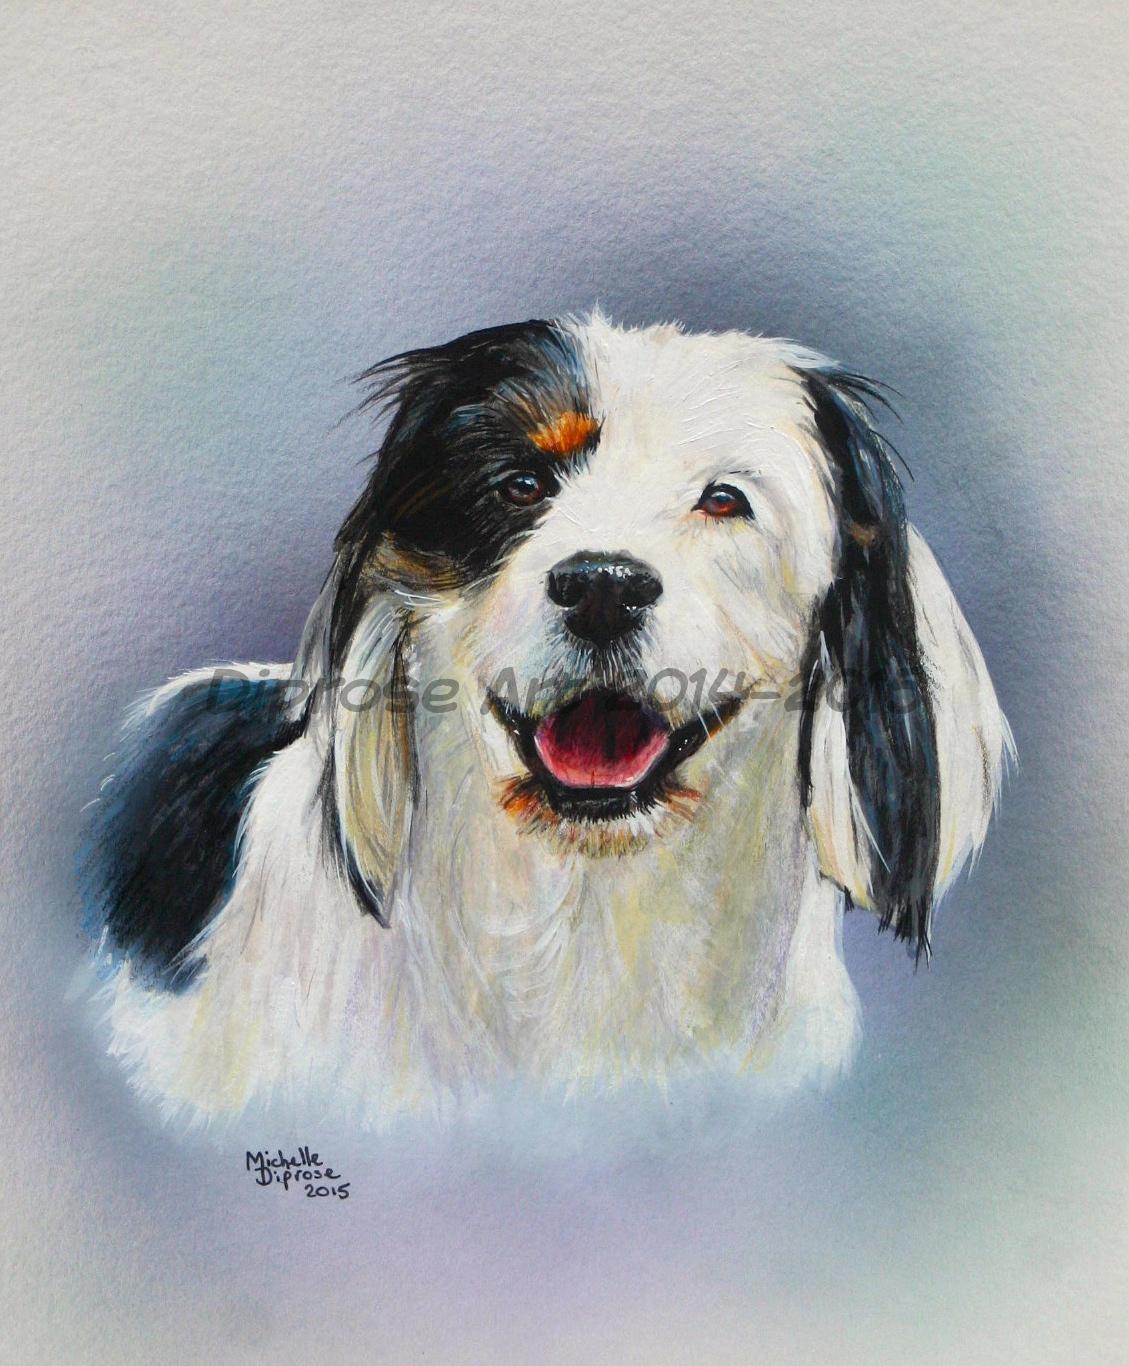 acrylics on board - approx A4 - pet dog portrait - Sky is a really cute Spaniel jack Brussel cross I think - super little lady and looks so happy with life